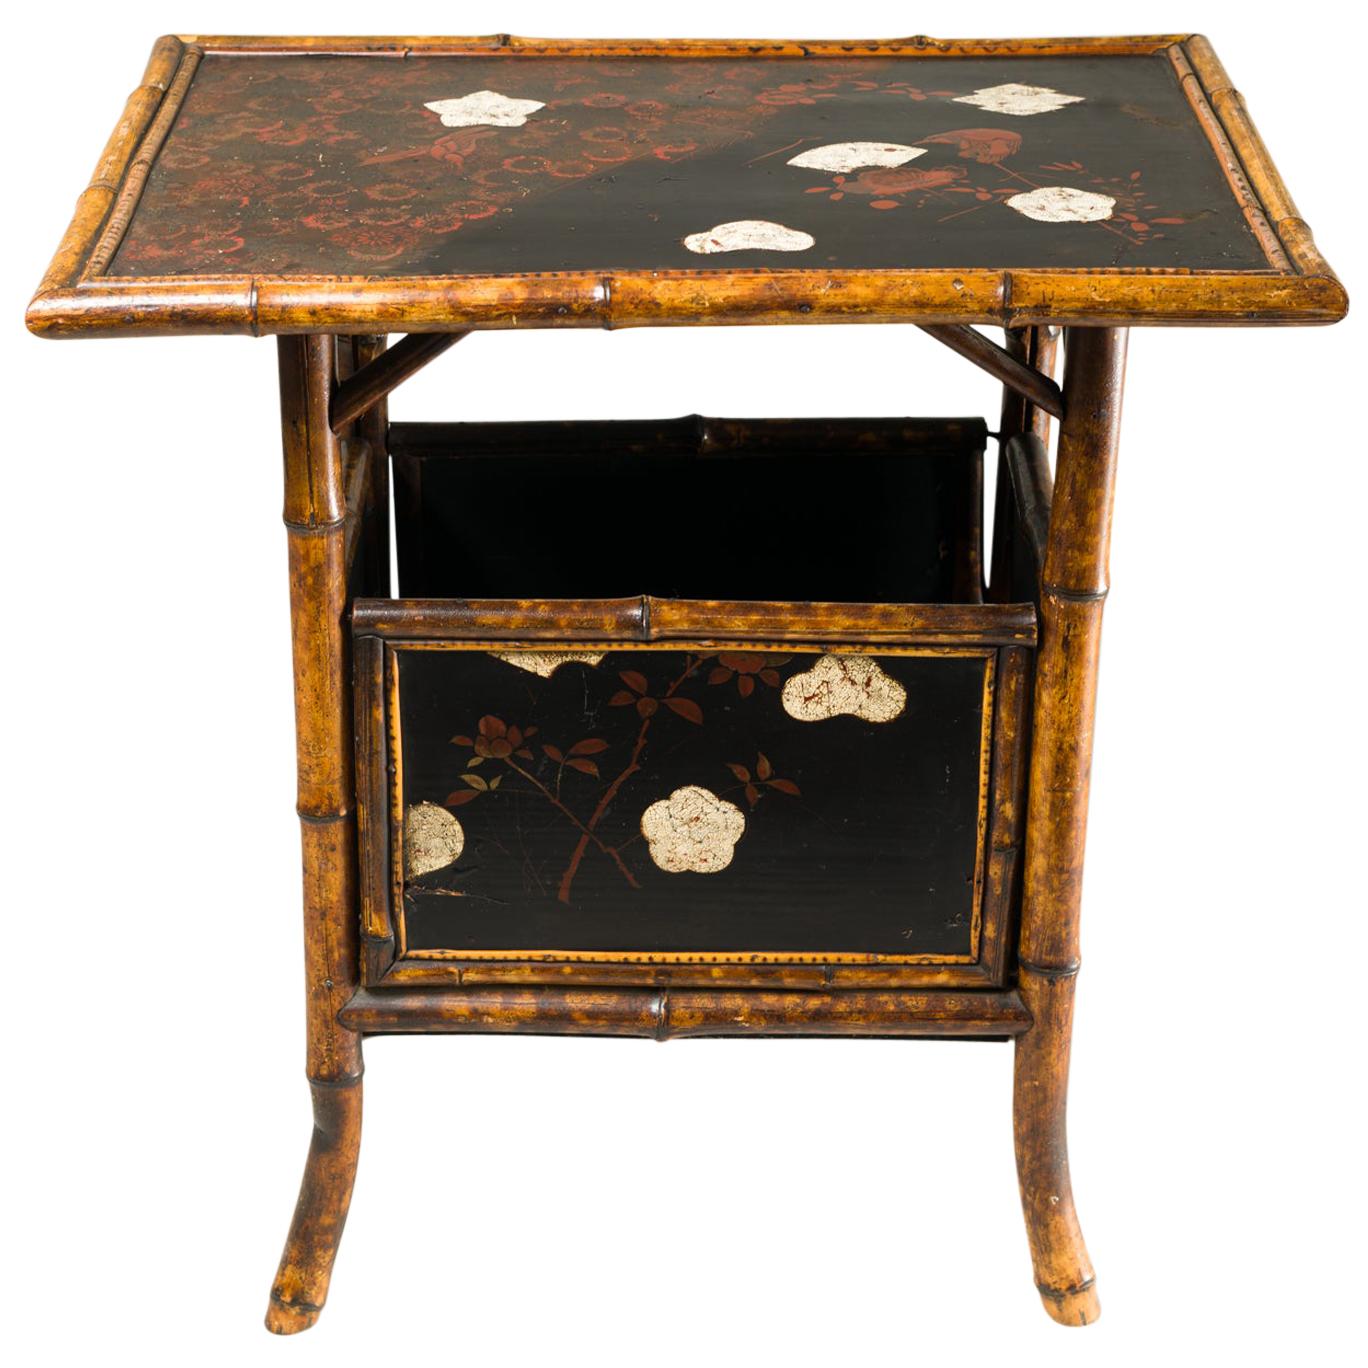 English Table with Lacquer Japanning, Eggshell Design and Bamboo For Sale